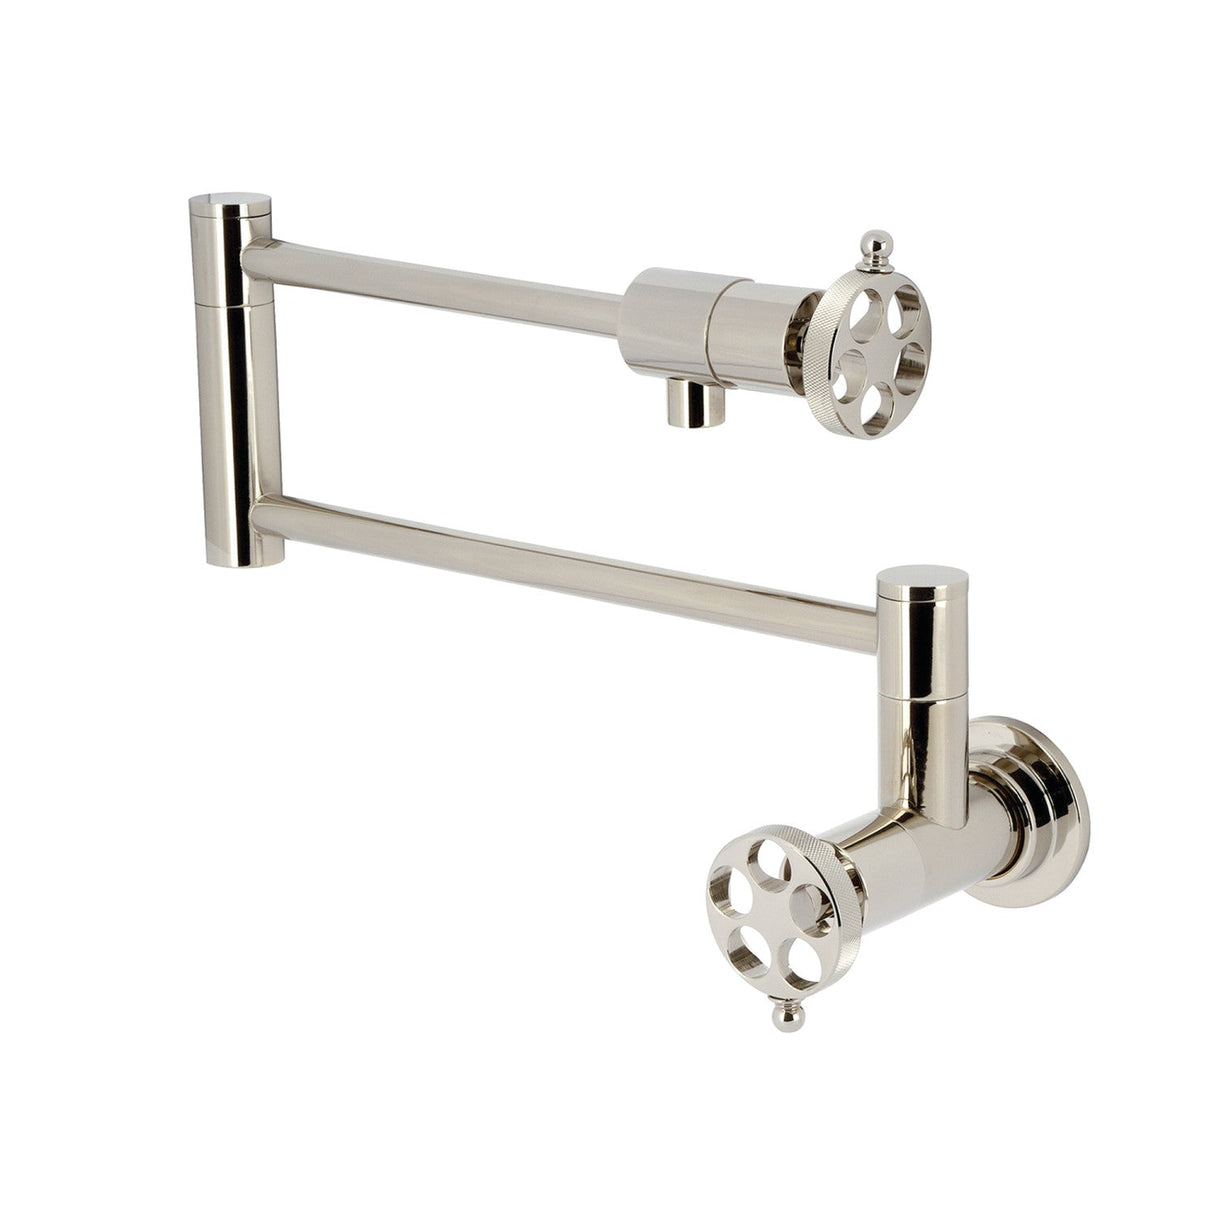 Wendell KS4106RKZ Two-Handle 1-Hole Wall Mount Pot Filler with Knurled Handle, Polished Nickel